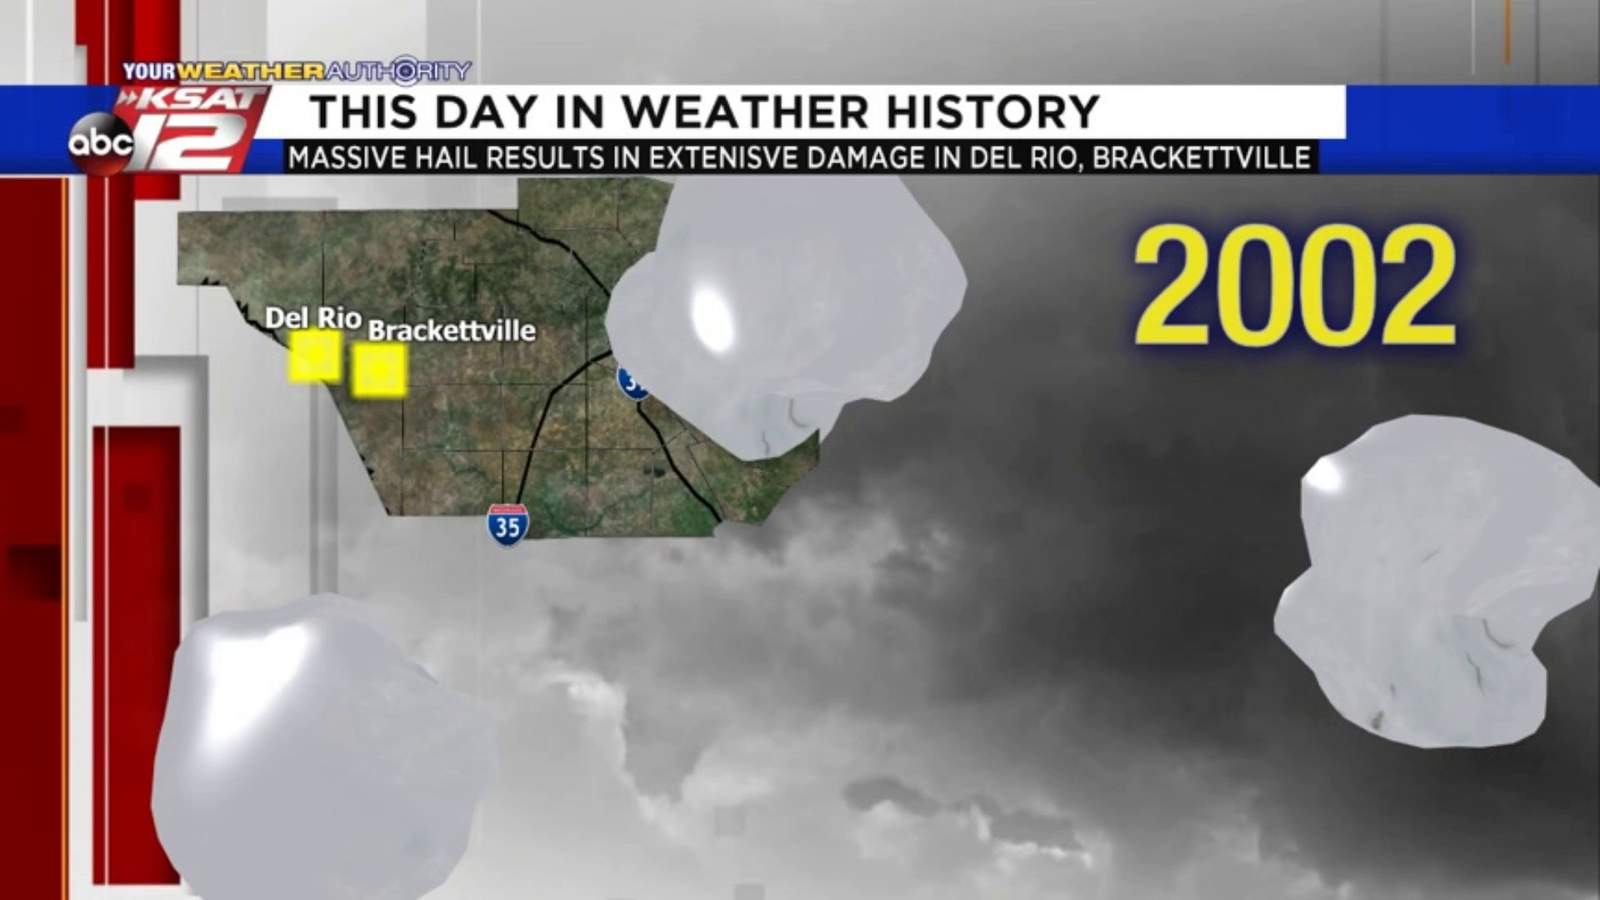 This Day in Weather History: April 7th